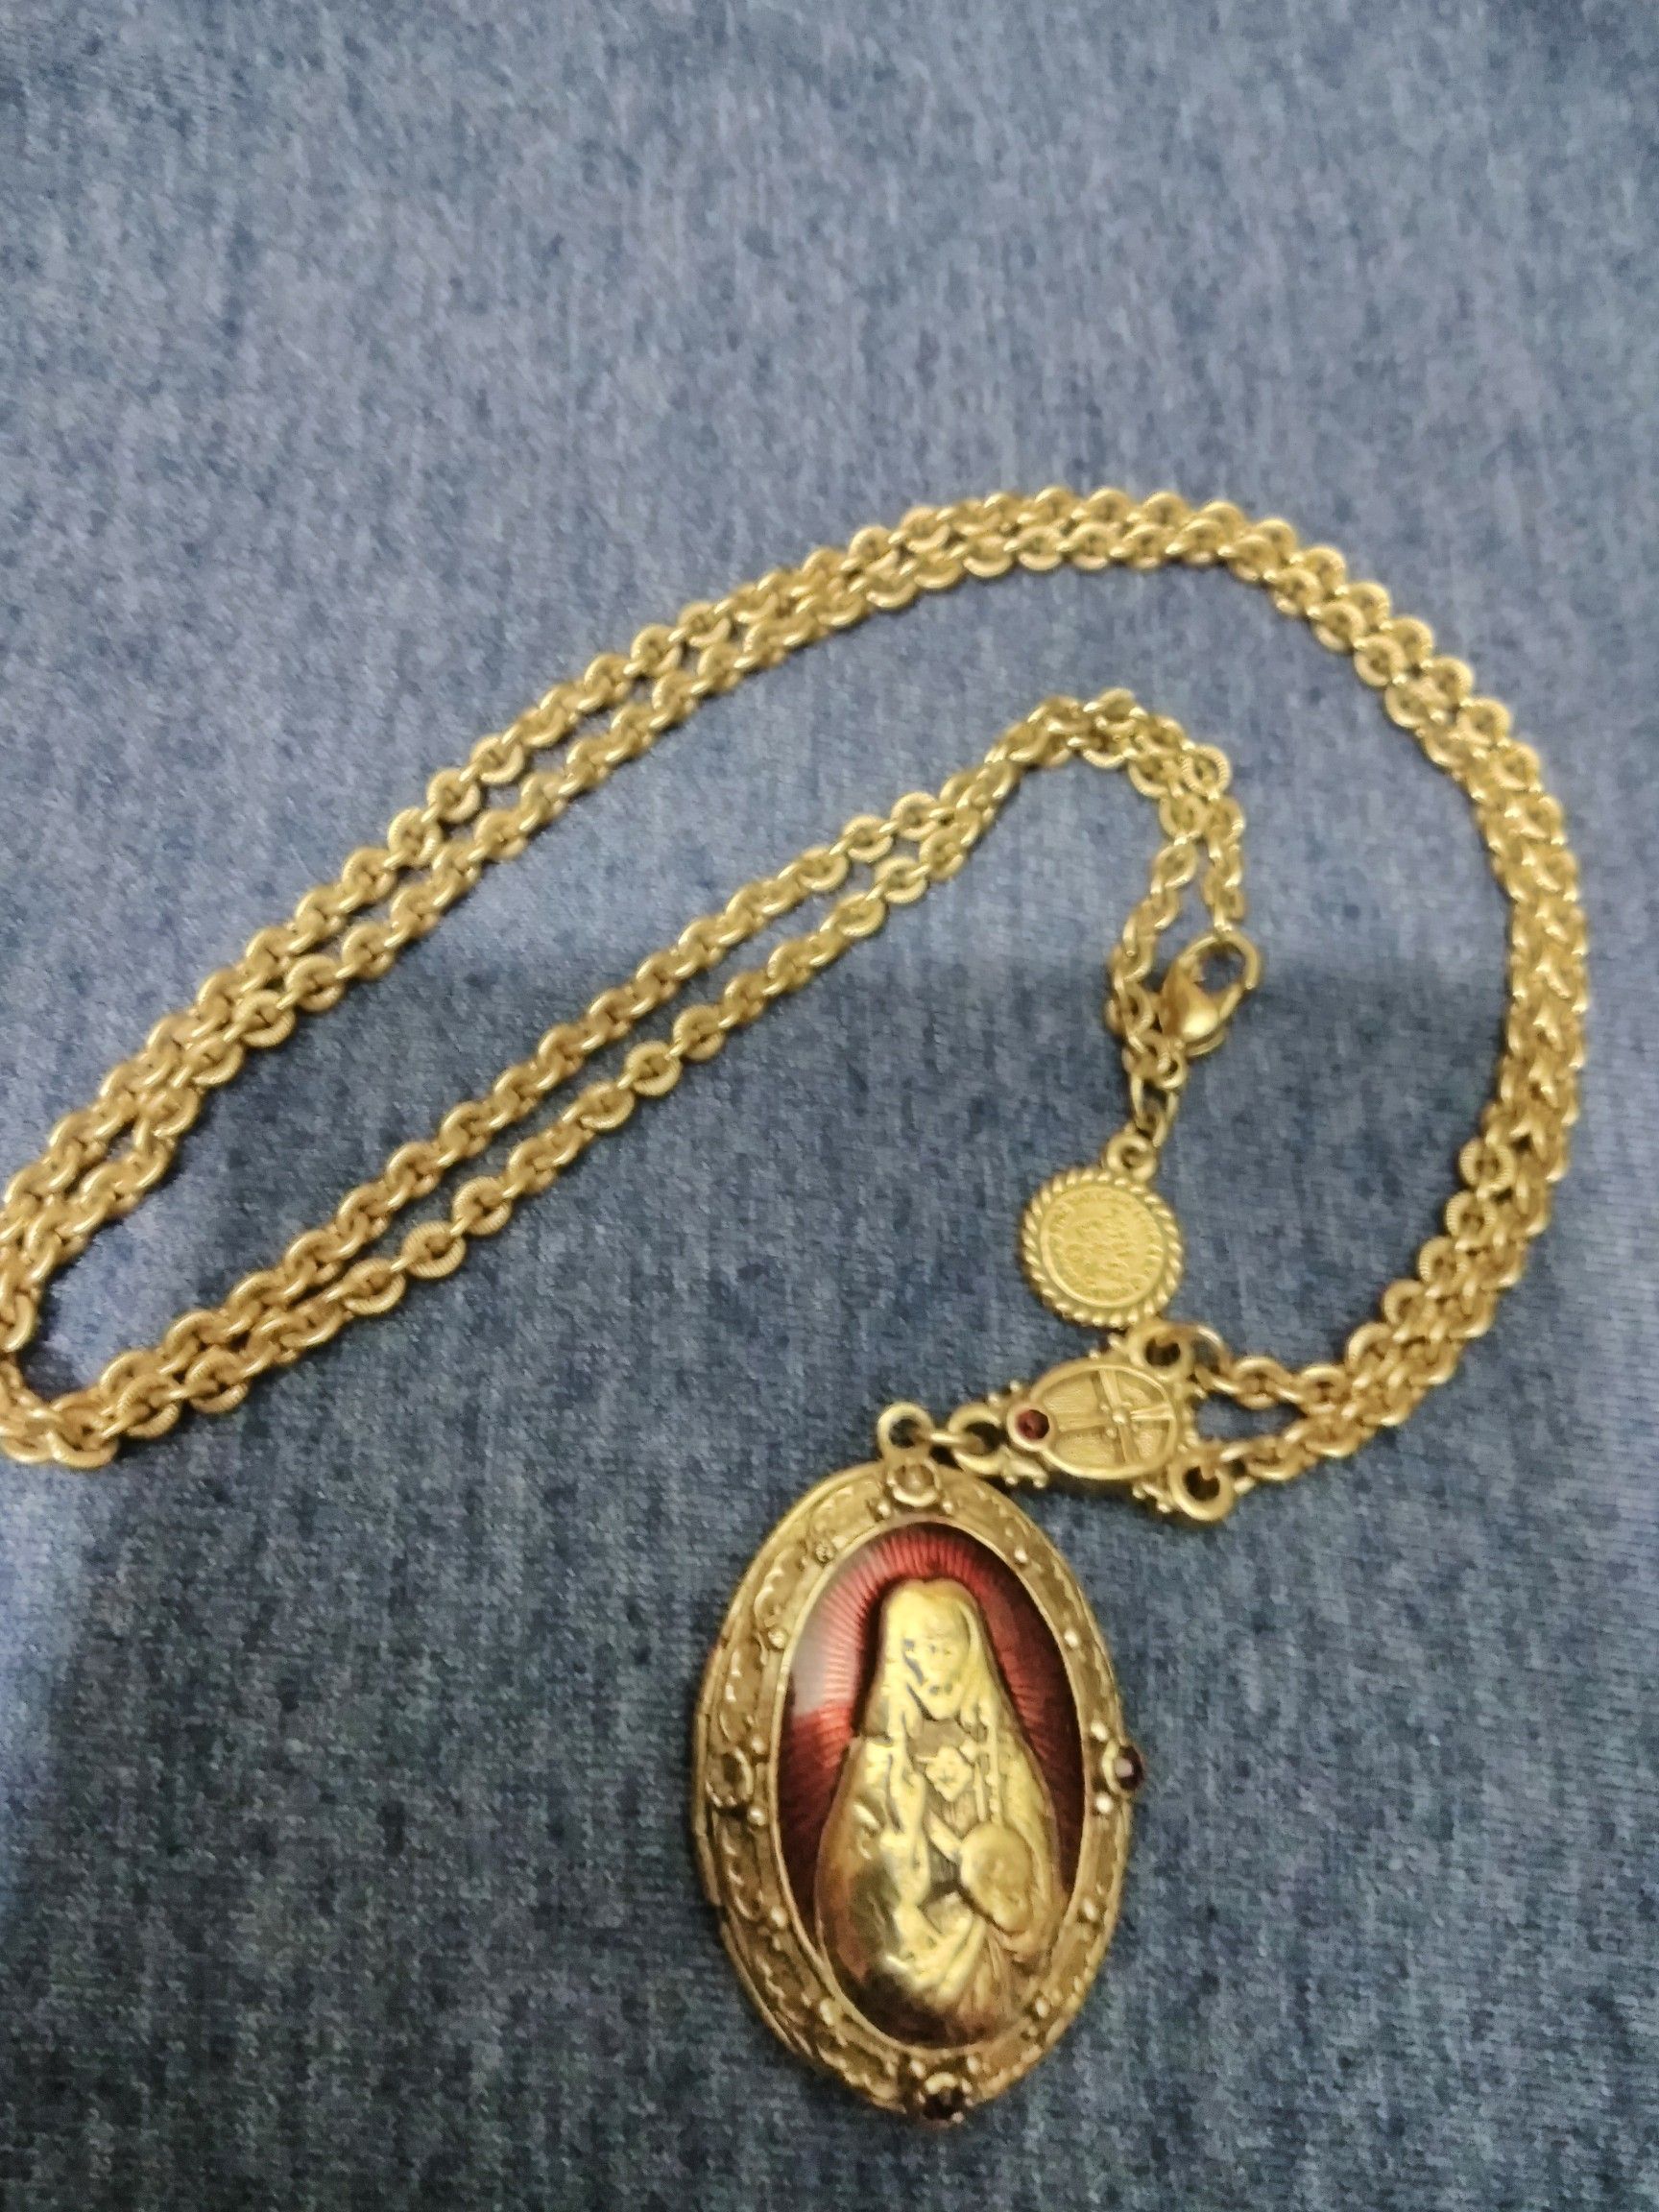 Vatican library collection locket necklace